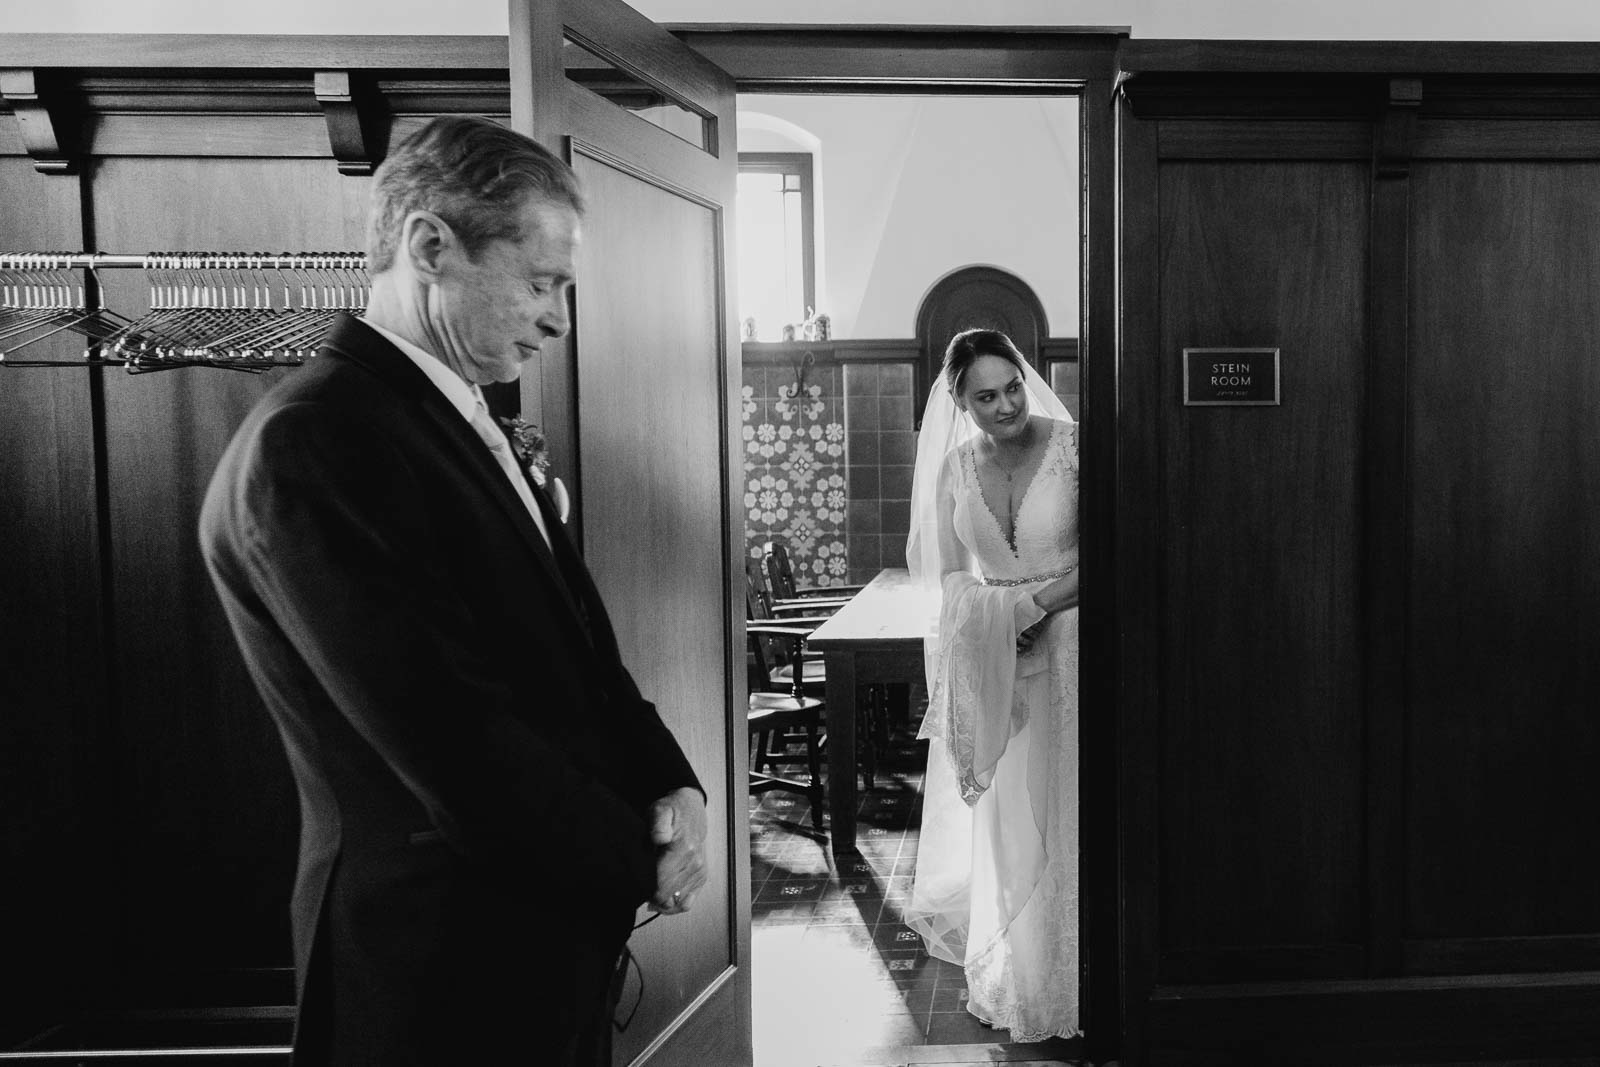 In a candid moment the bride peaks out looking toward the courtyard while the father of the bride had a moment of quiet clothes in his eyes